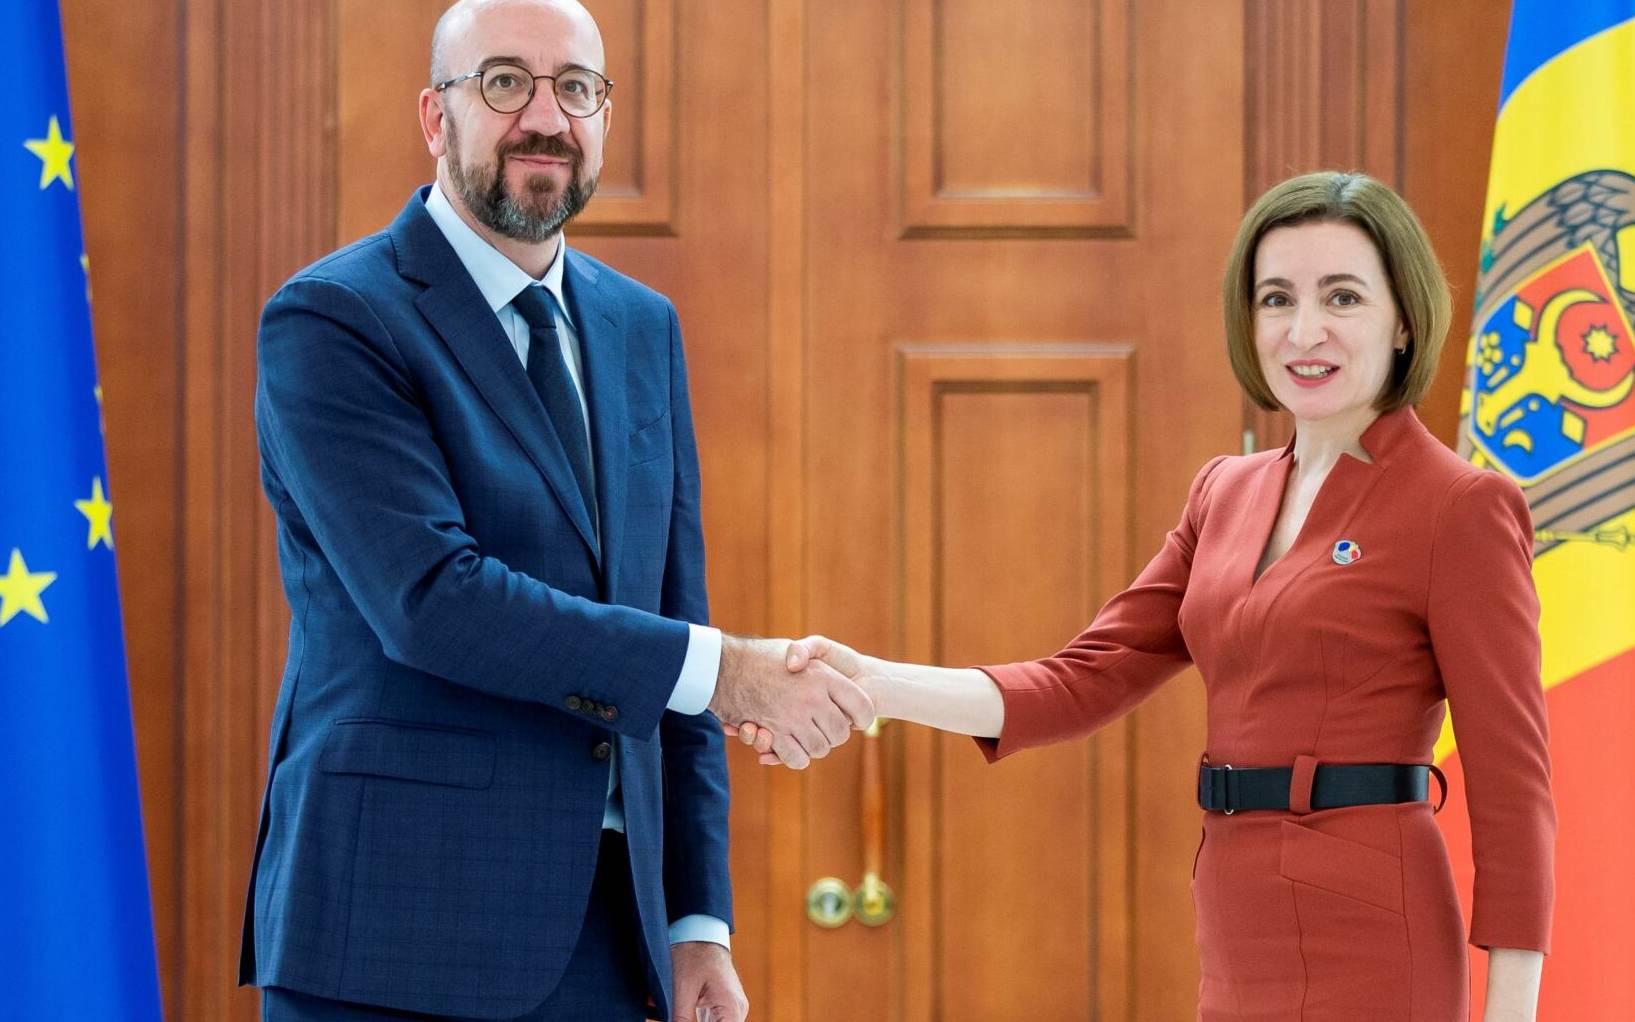 European Council President Charles Michel (L) shakes hands with Moldova's President Maia Sandu during their meeting in Chisinau on May 4, 2022. - European Council President Charles Michel on May 4 pledged to increase EU military aid to Moldova, Ukraine's neighbour that has seen a series of attacks in a pro-Moscow separatist region. (Photo by BOGDAN TUDOR / AFP)